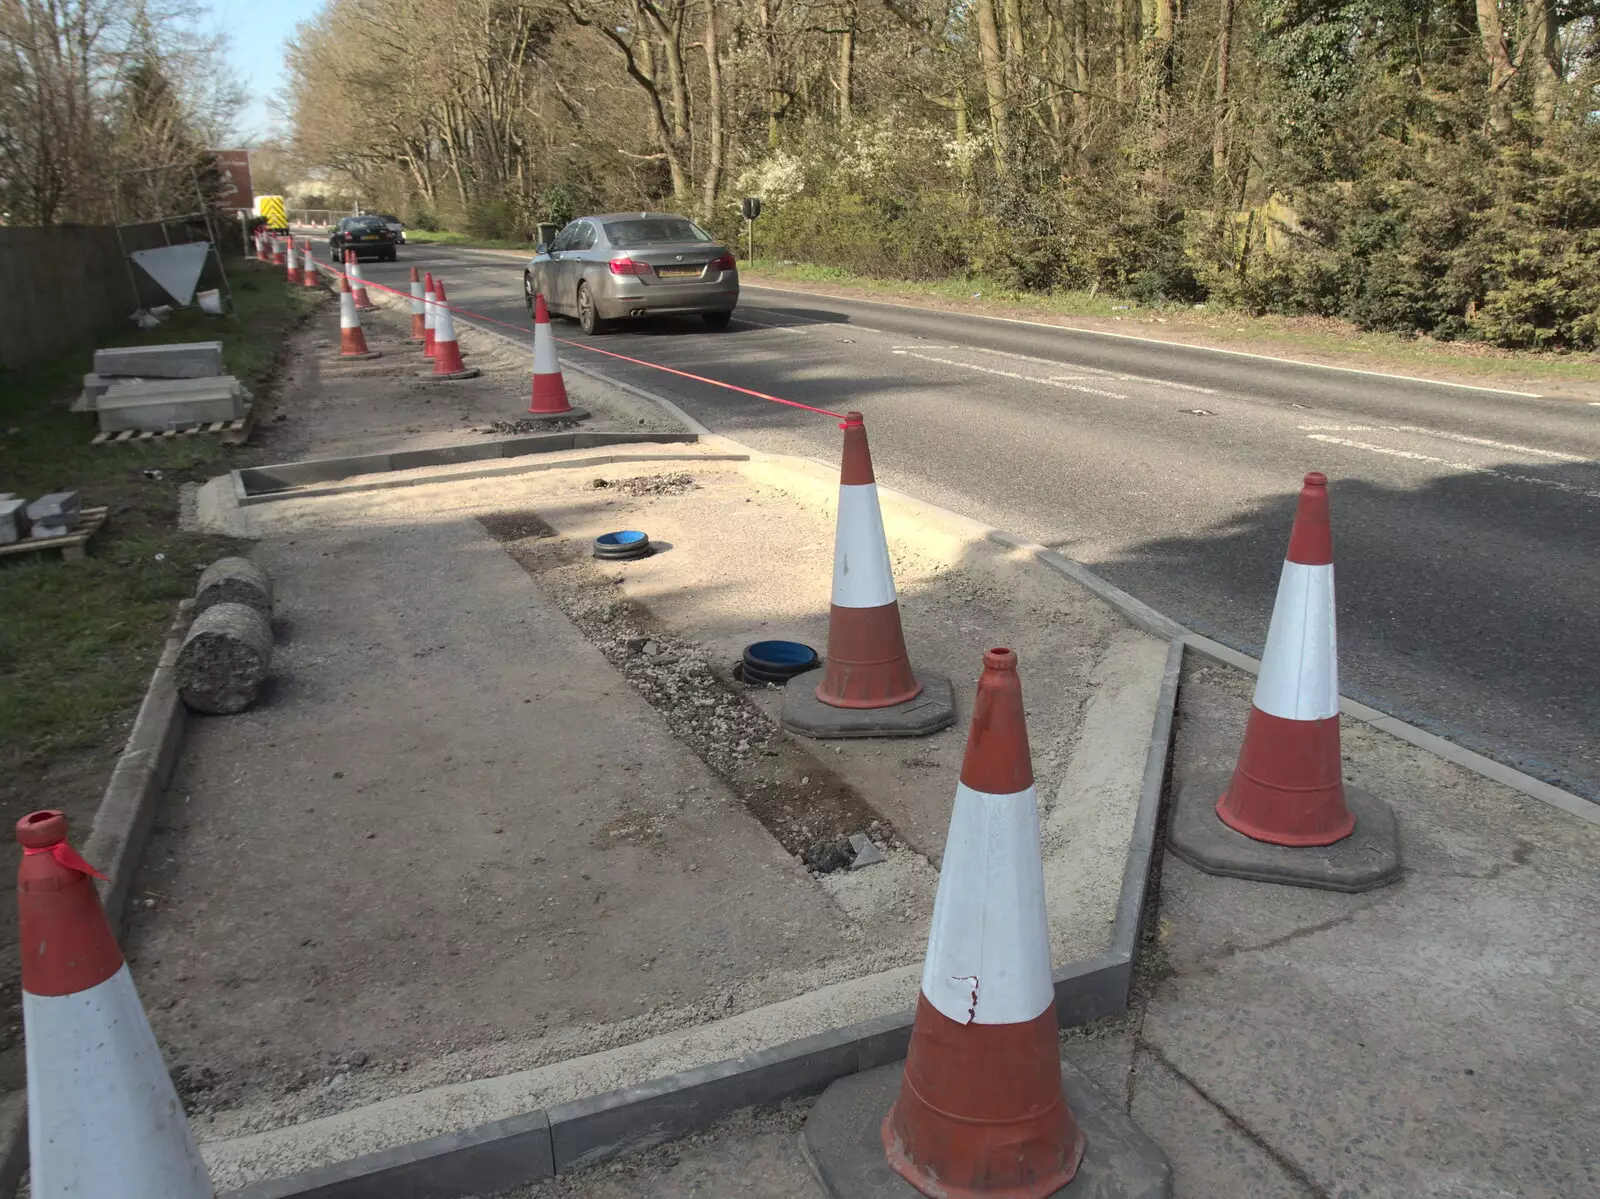 There's a small cycle exit, from Roadworks and Harry's Trampoline, Brome, Suffolk - 6th April 2021